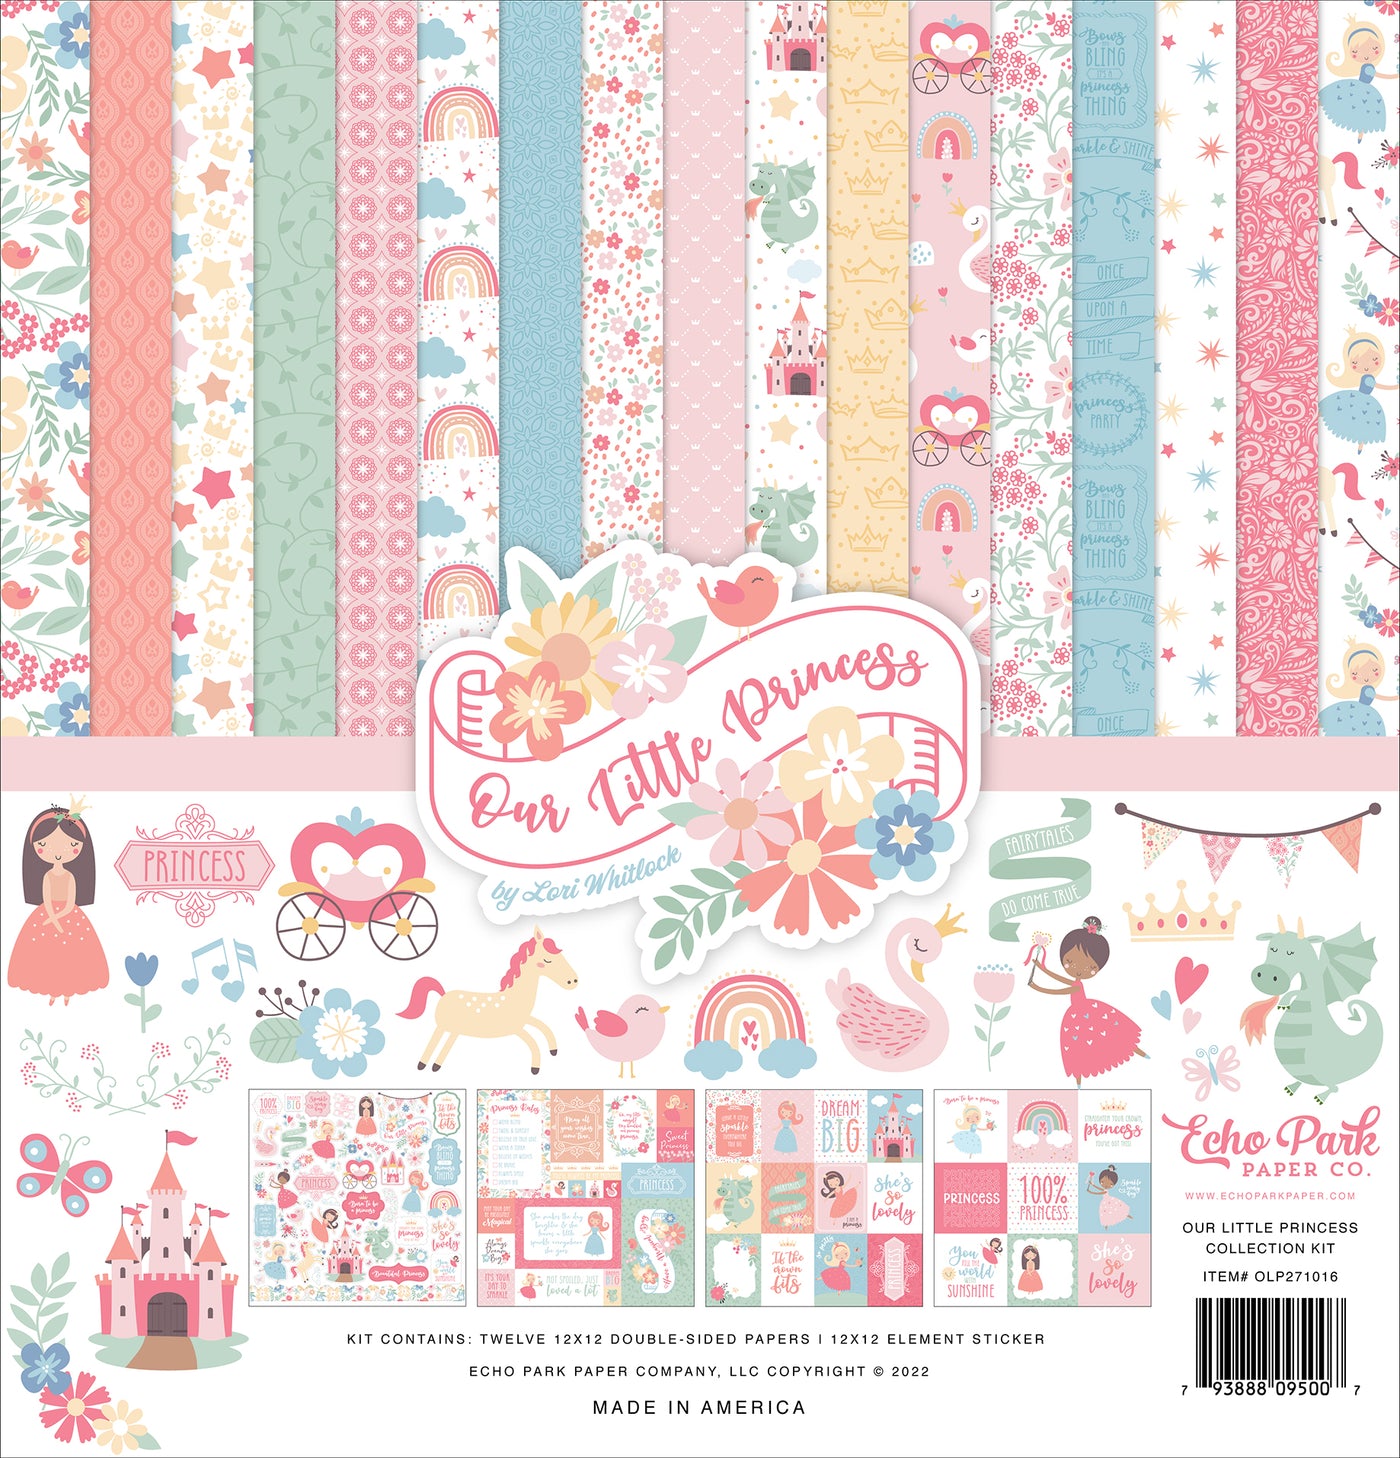 Twelve (12) Unique Double-Sided 12x12 Pattern Papers Includes 12x12 Sheet w/ Coordinating Element Stickers